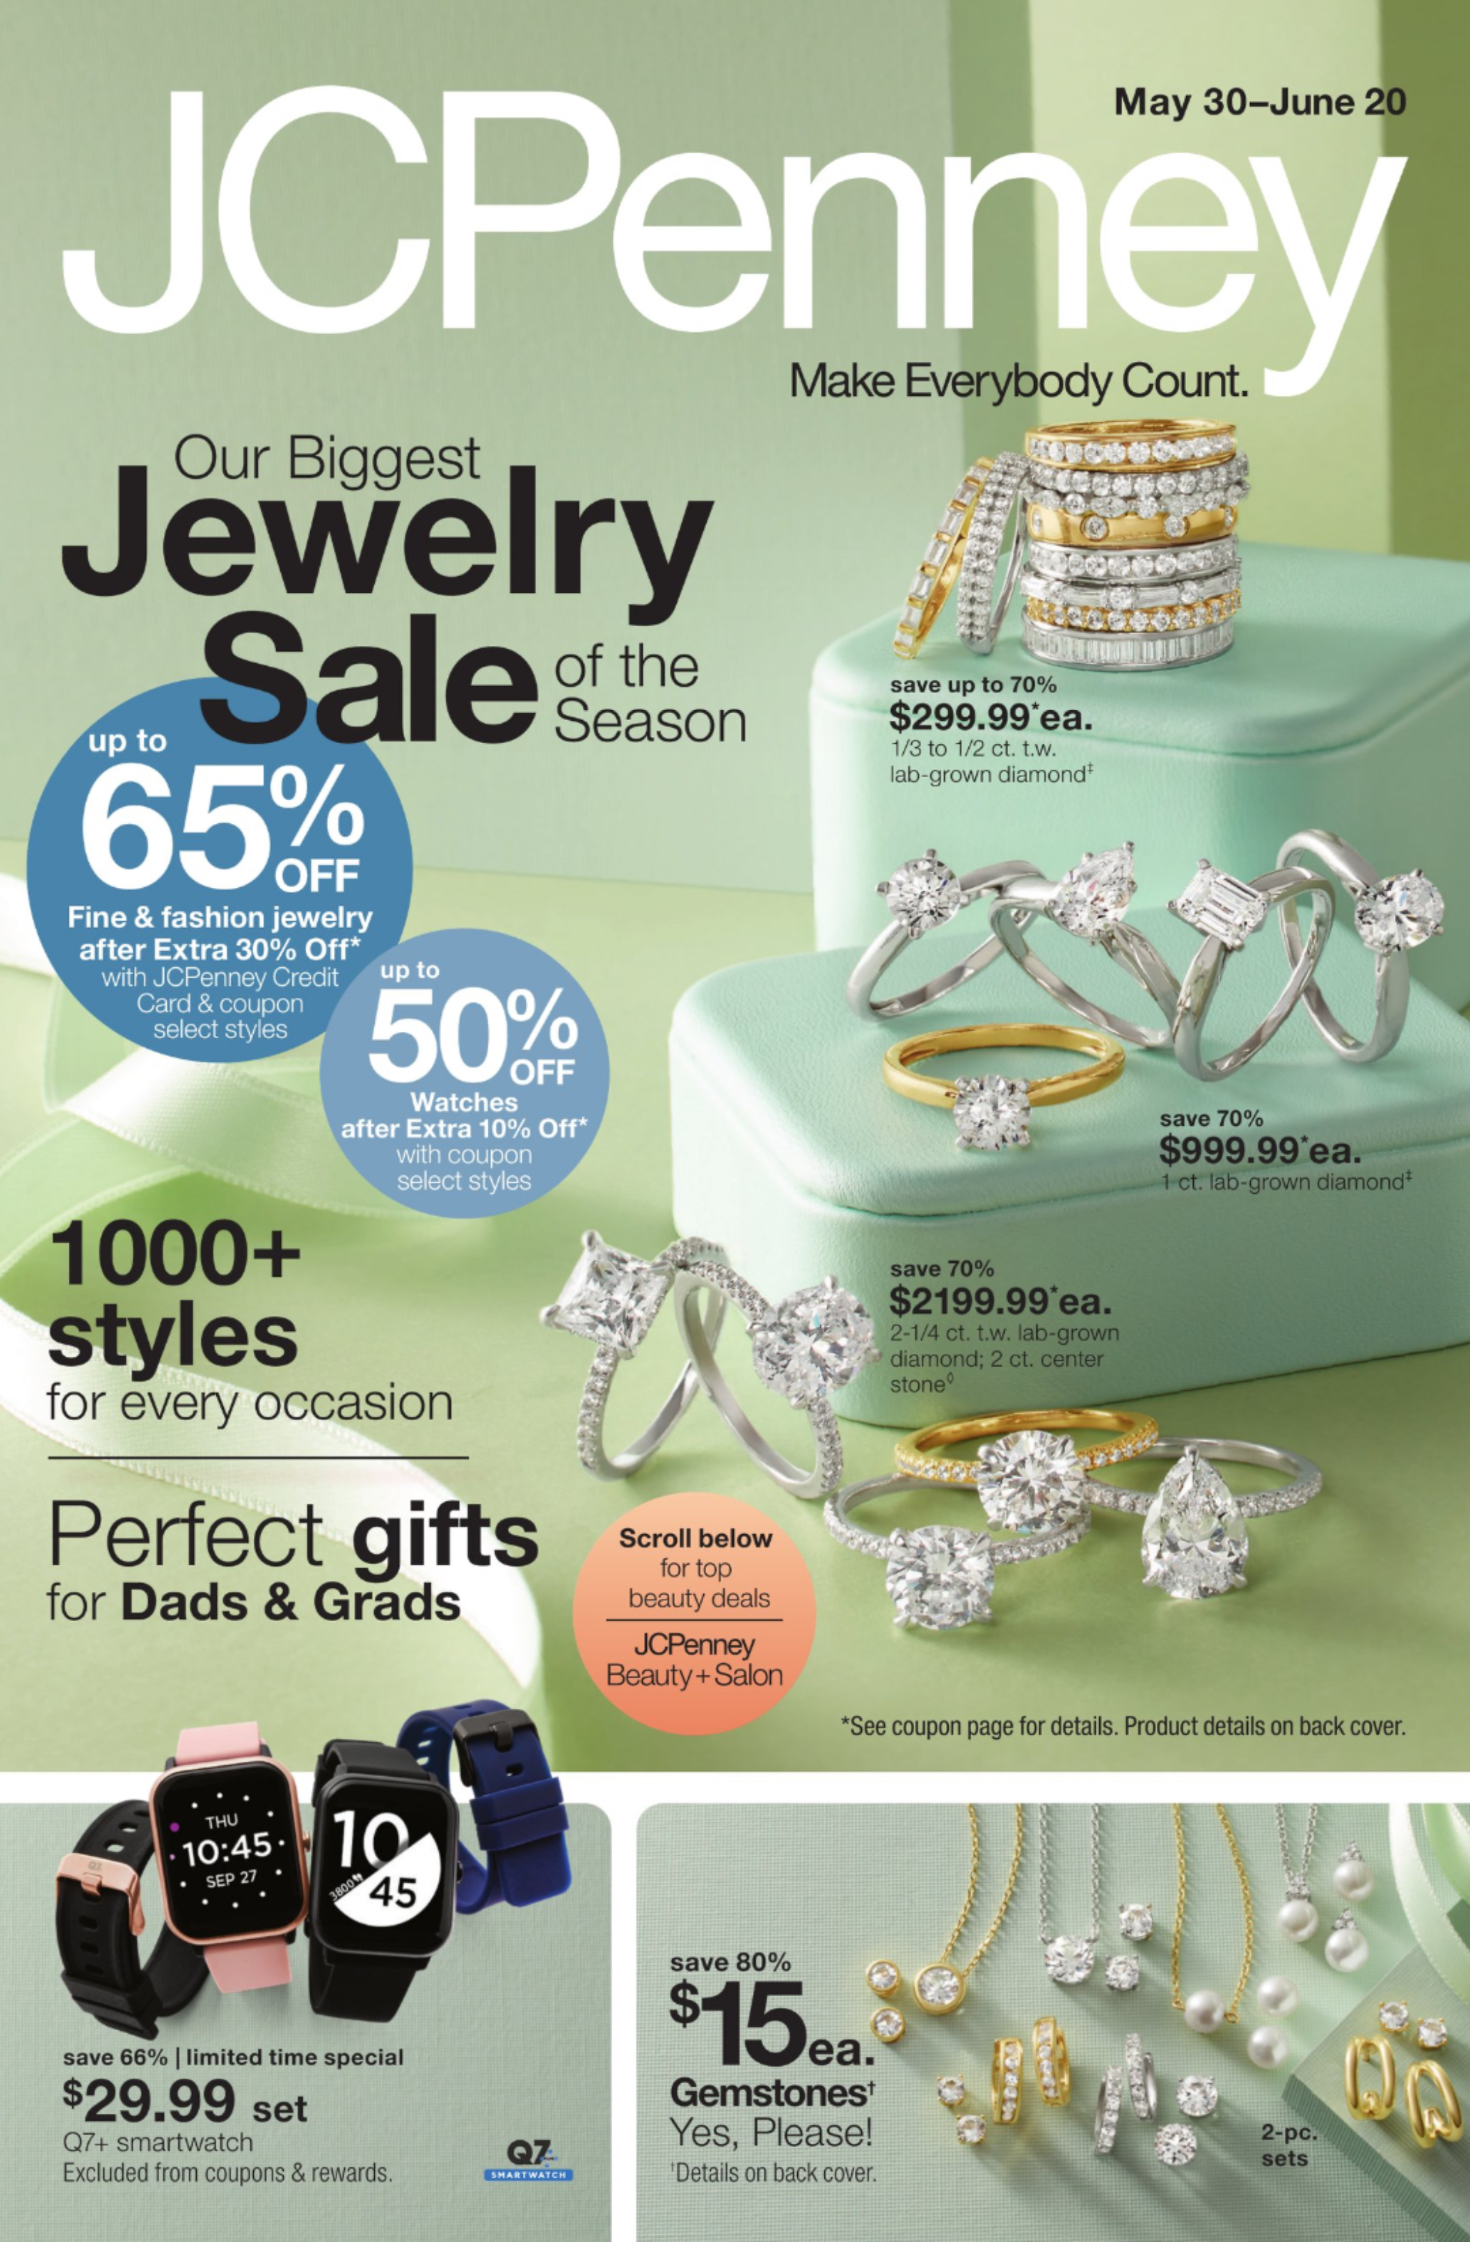 Join us in the JCPenney Fine Jewelry Department for our Biggest Sale of the Season, where you can purchase your selections at prices up to 65% Off when you use your JCPenney Card and coupon. Now until 6/20, so stop in Today